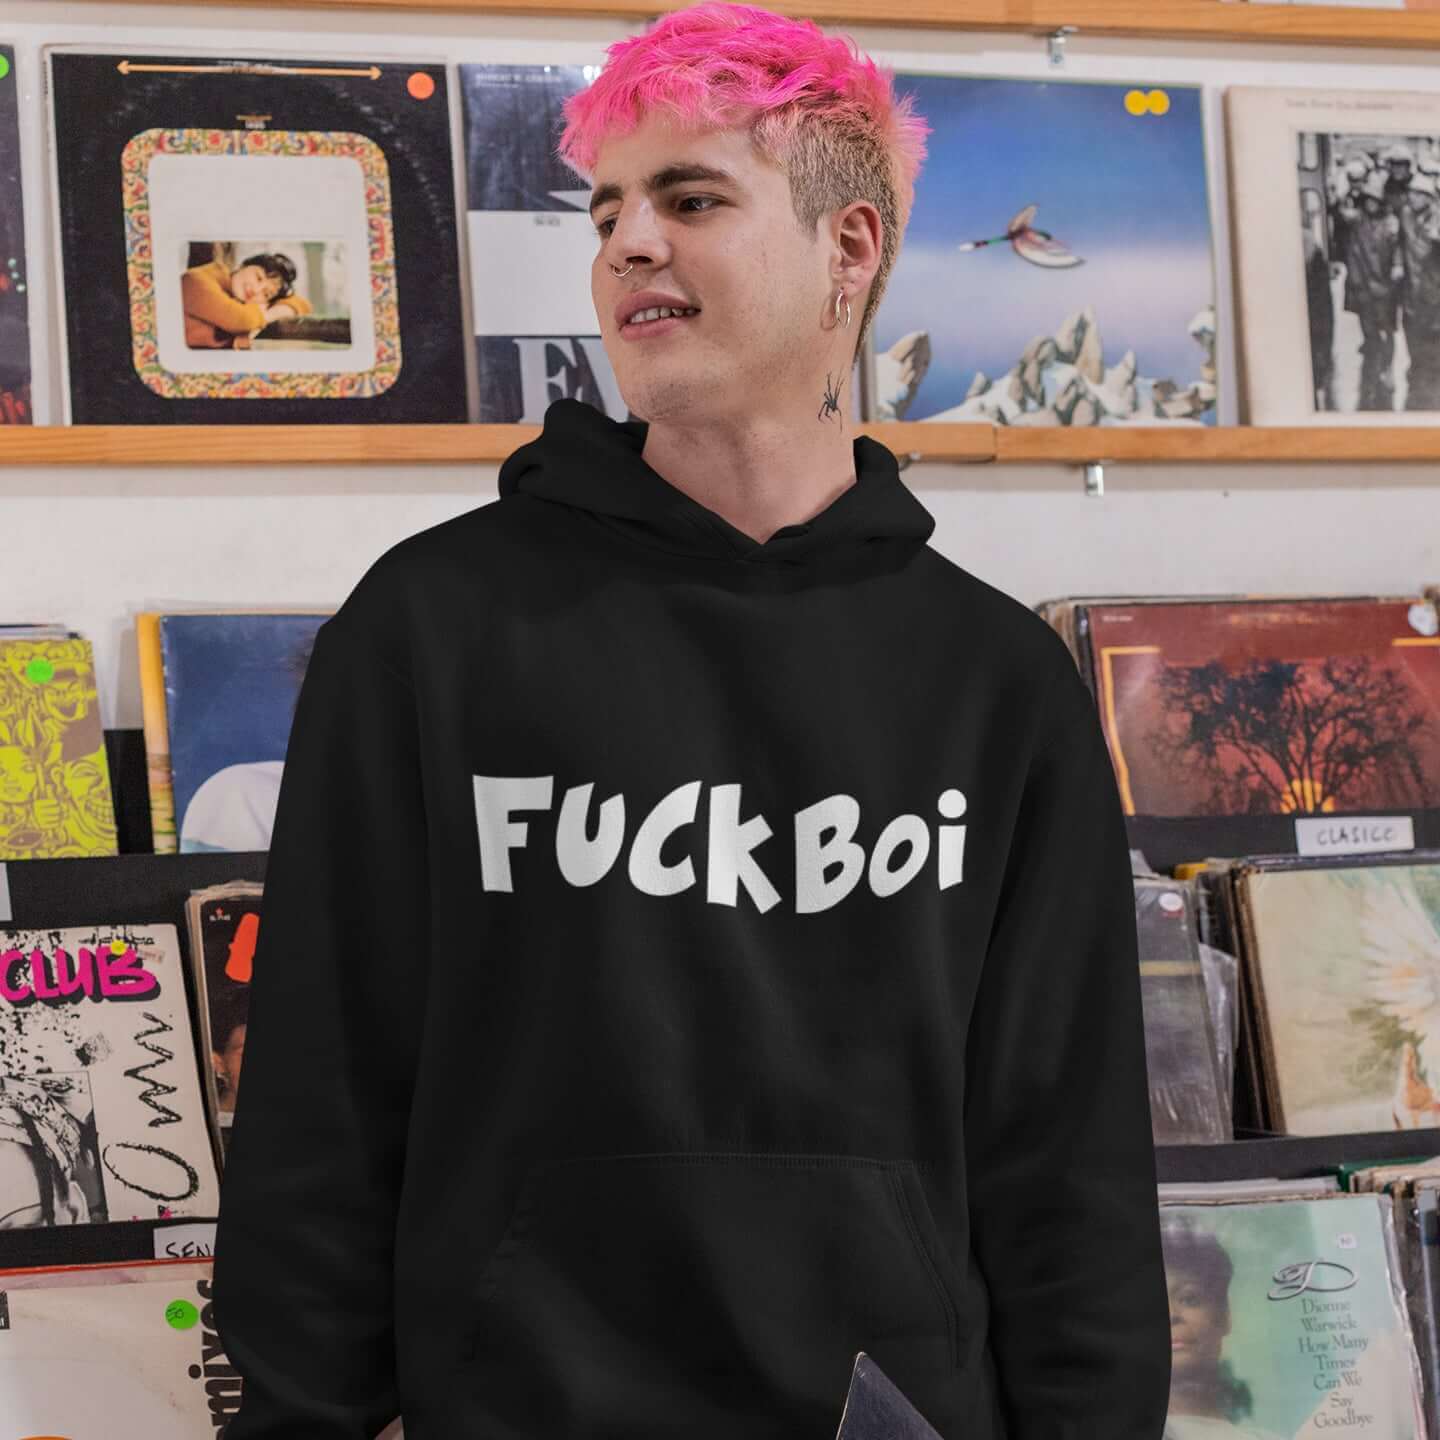 Man with pink hair wearing a black hoodie sweatshirt with the word Fuckboi printed on the front.